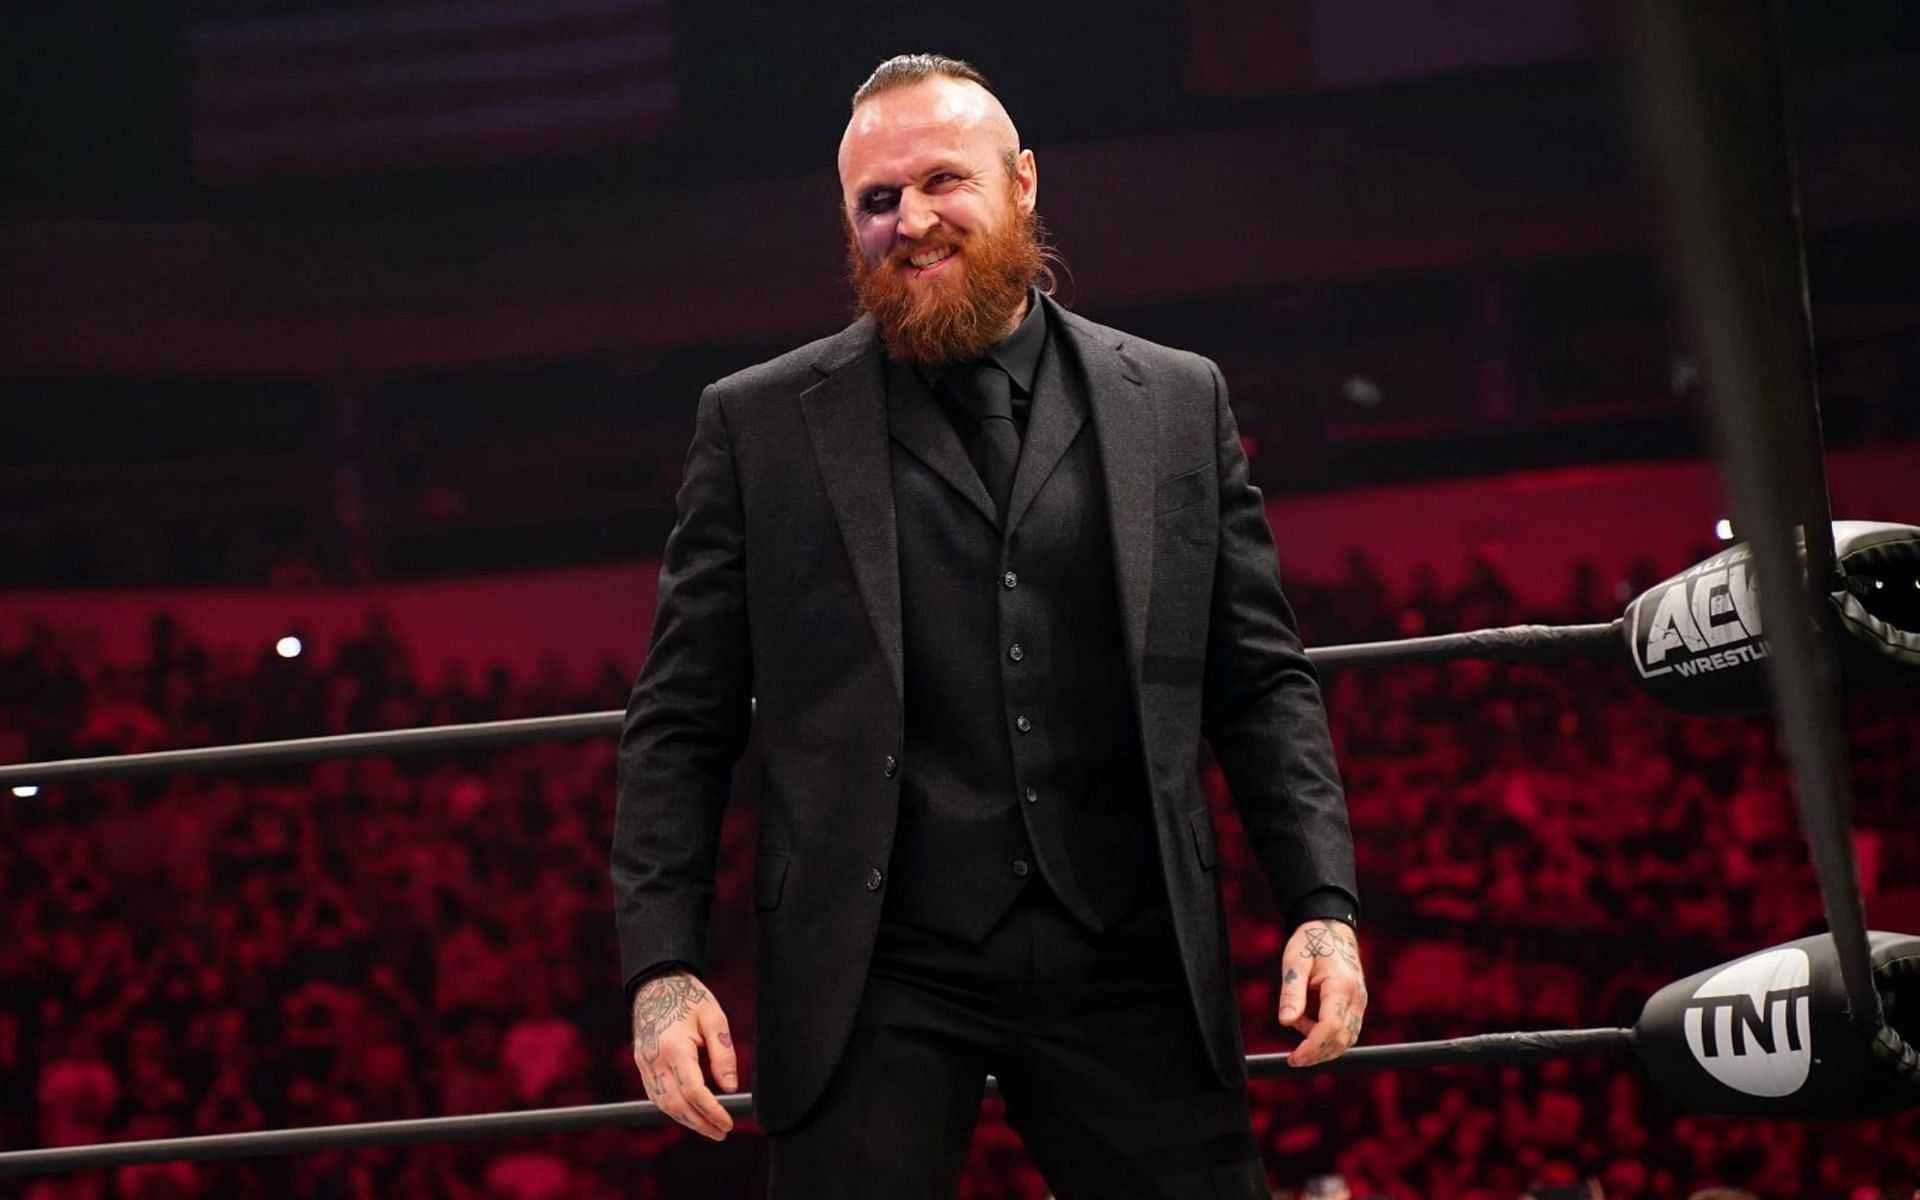 The leader of AEW